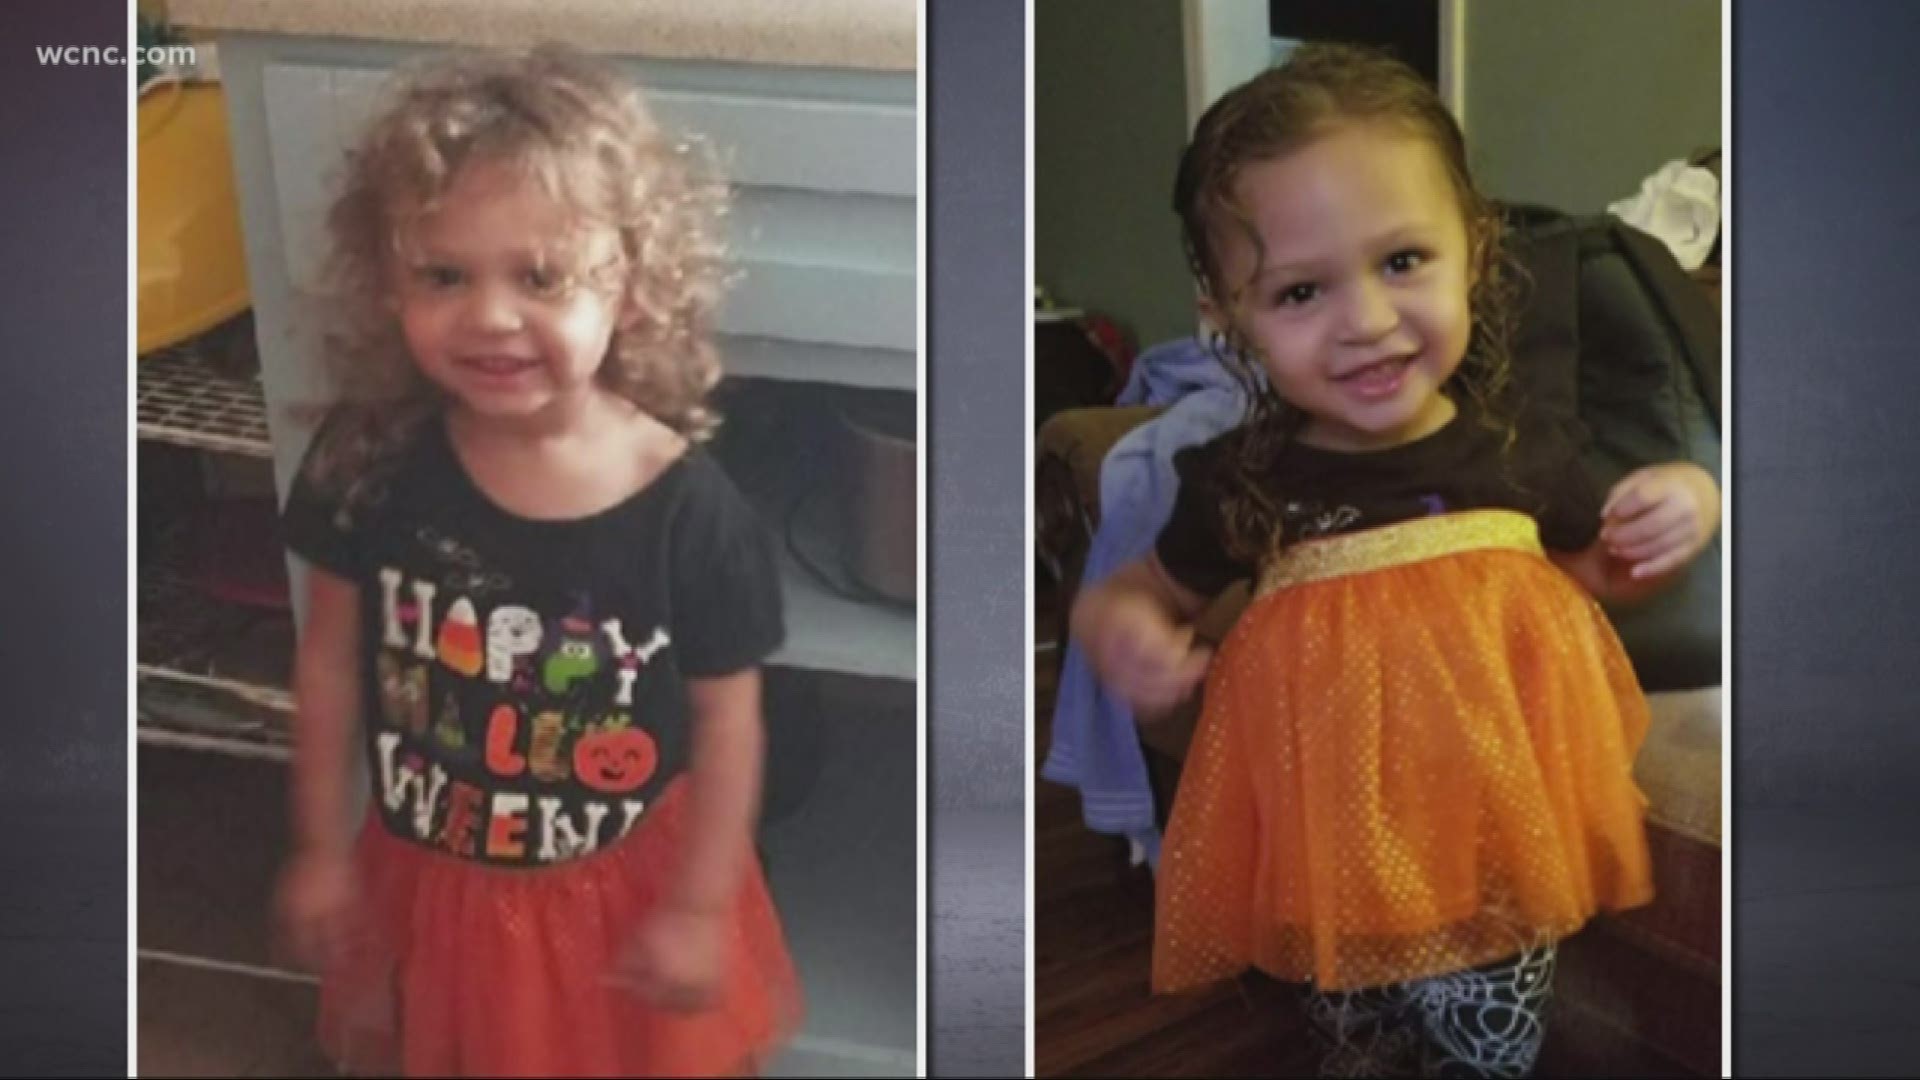 North Carolina officials have issued an Amber Alert for a missing 3-year-old girl from Scotland County.